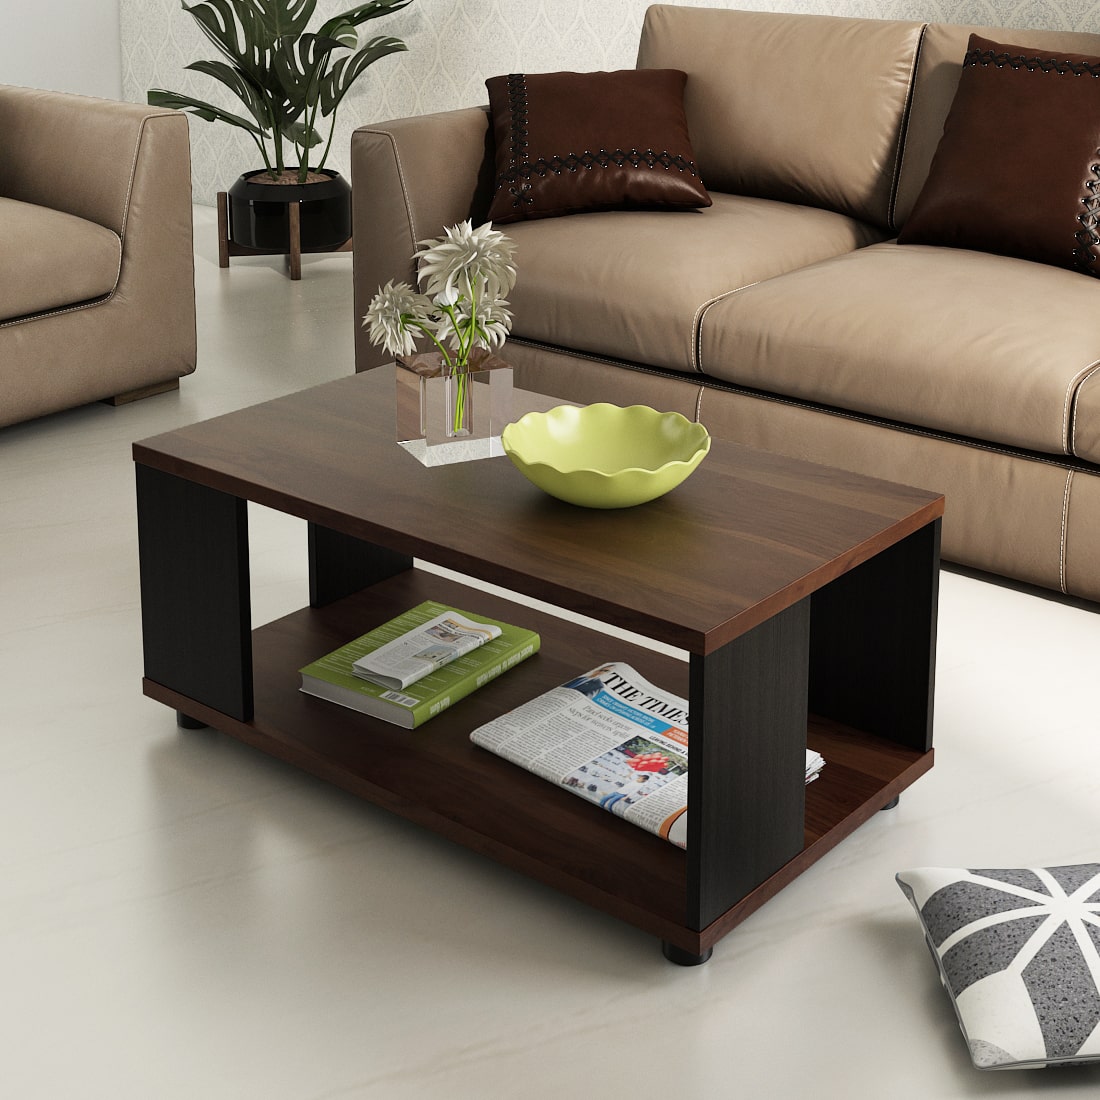 Oeste gravedad Capilla kosmo-centre-table-ct23-sheesham-and-natural-wenge | Spacewood Ecommerce